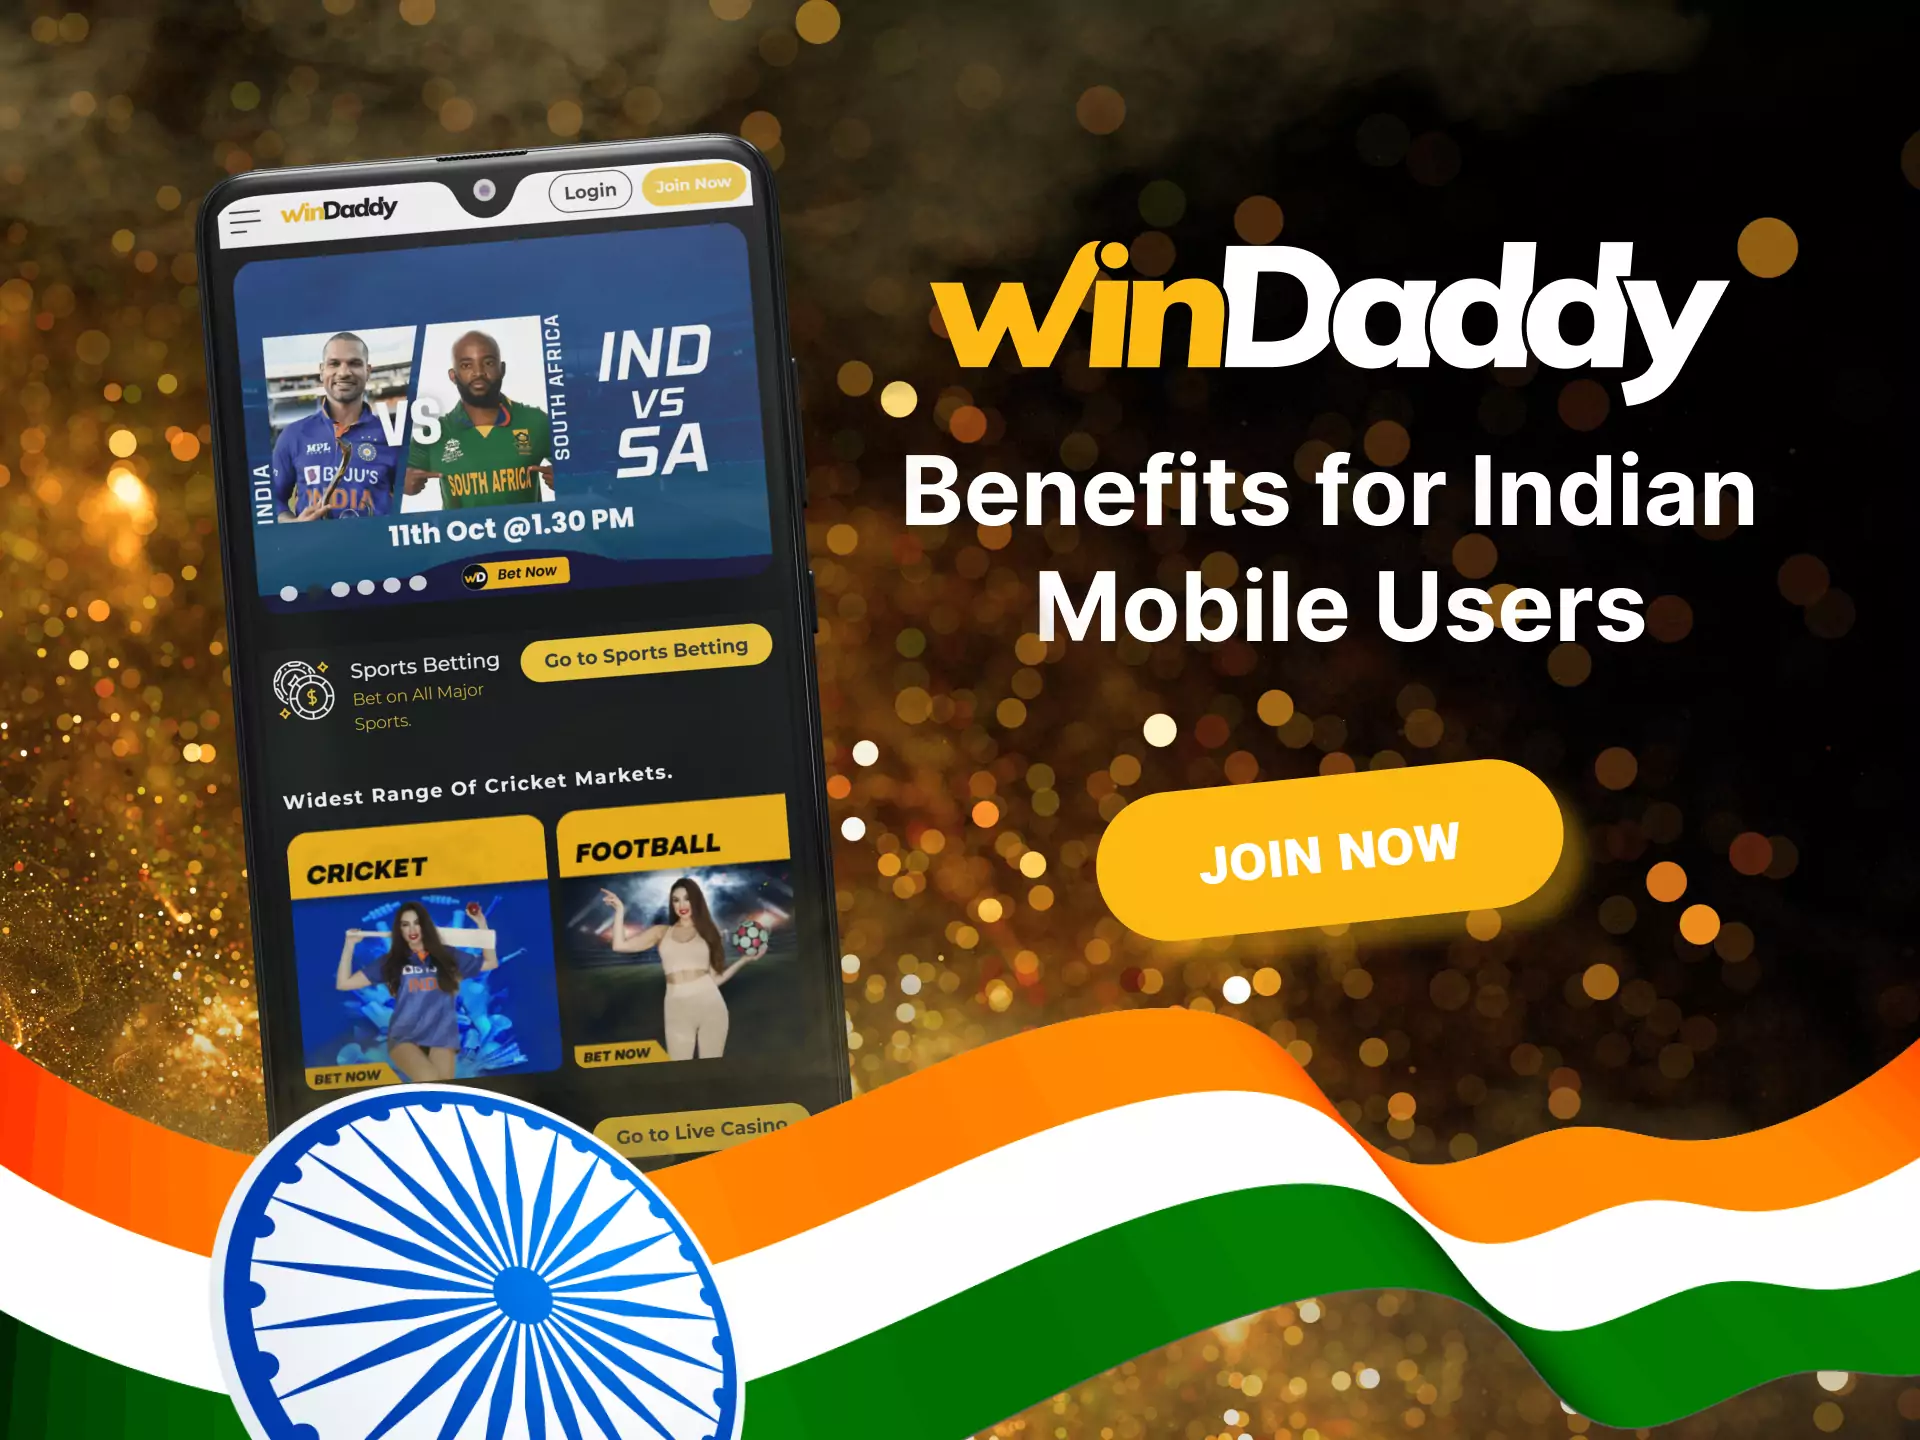 Use all the advantages of the mobile site of Windaddy to the maximum.